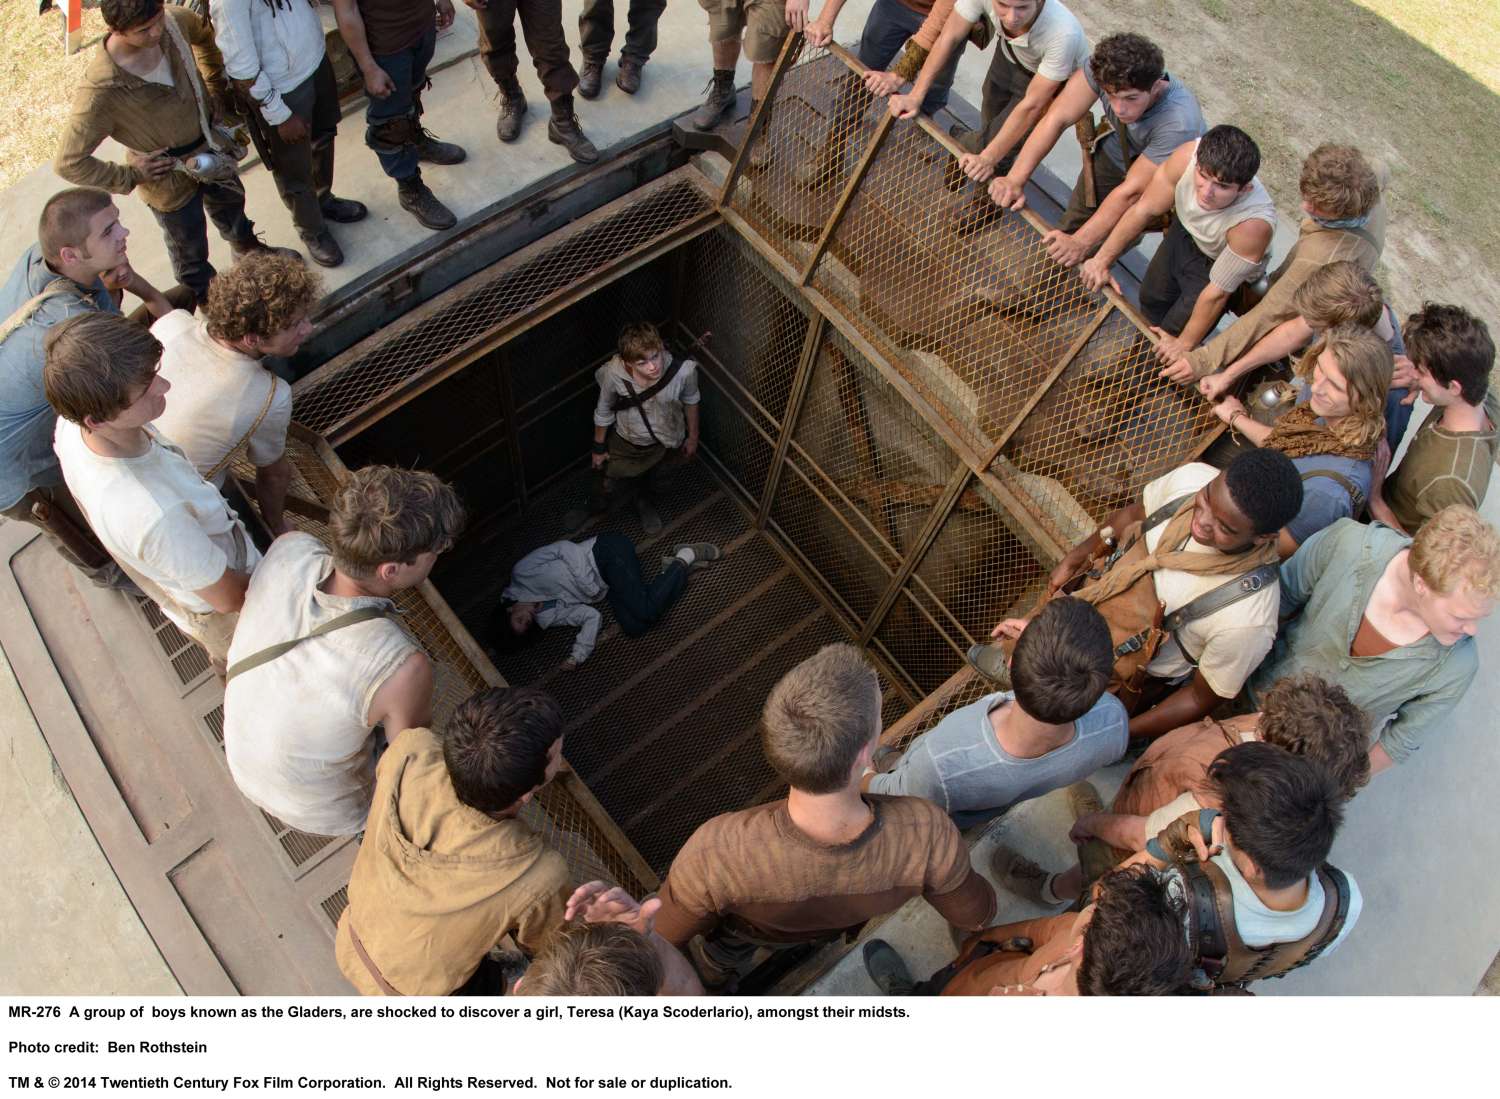 Review: Exploring “The Maze Runner” with Will Poulter and Kaya Scodelario